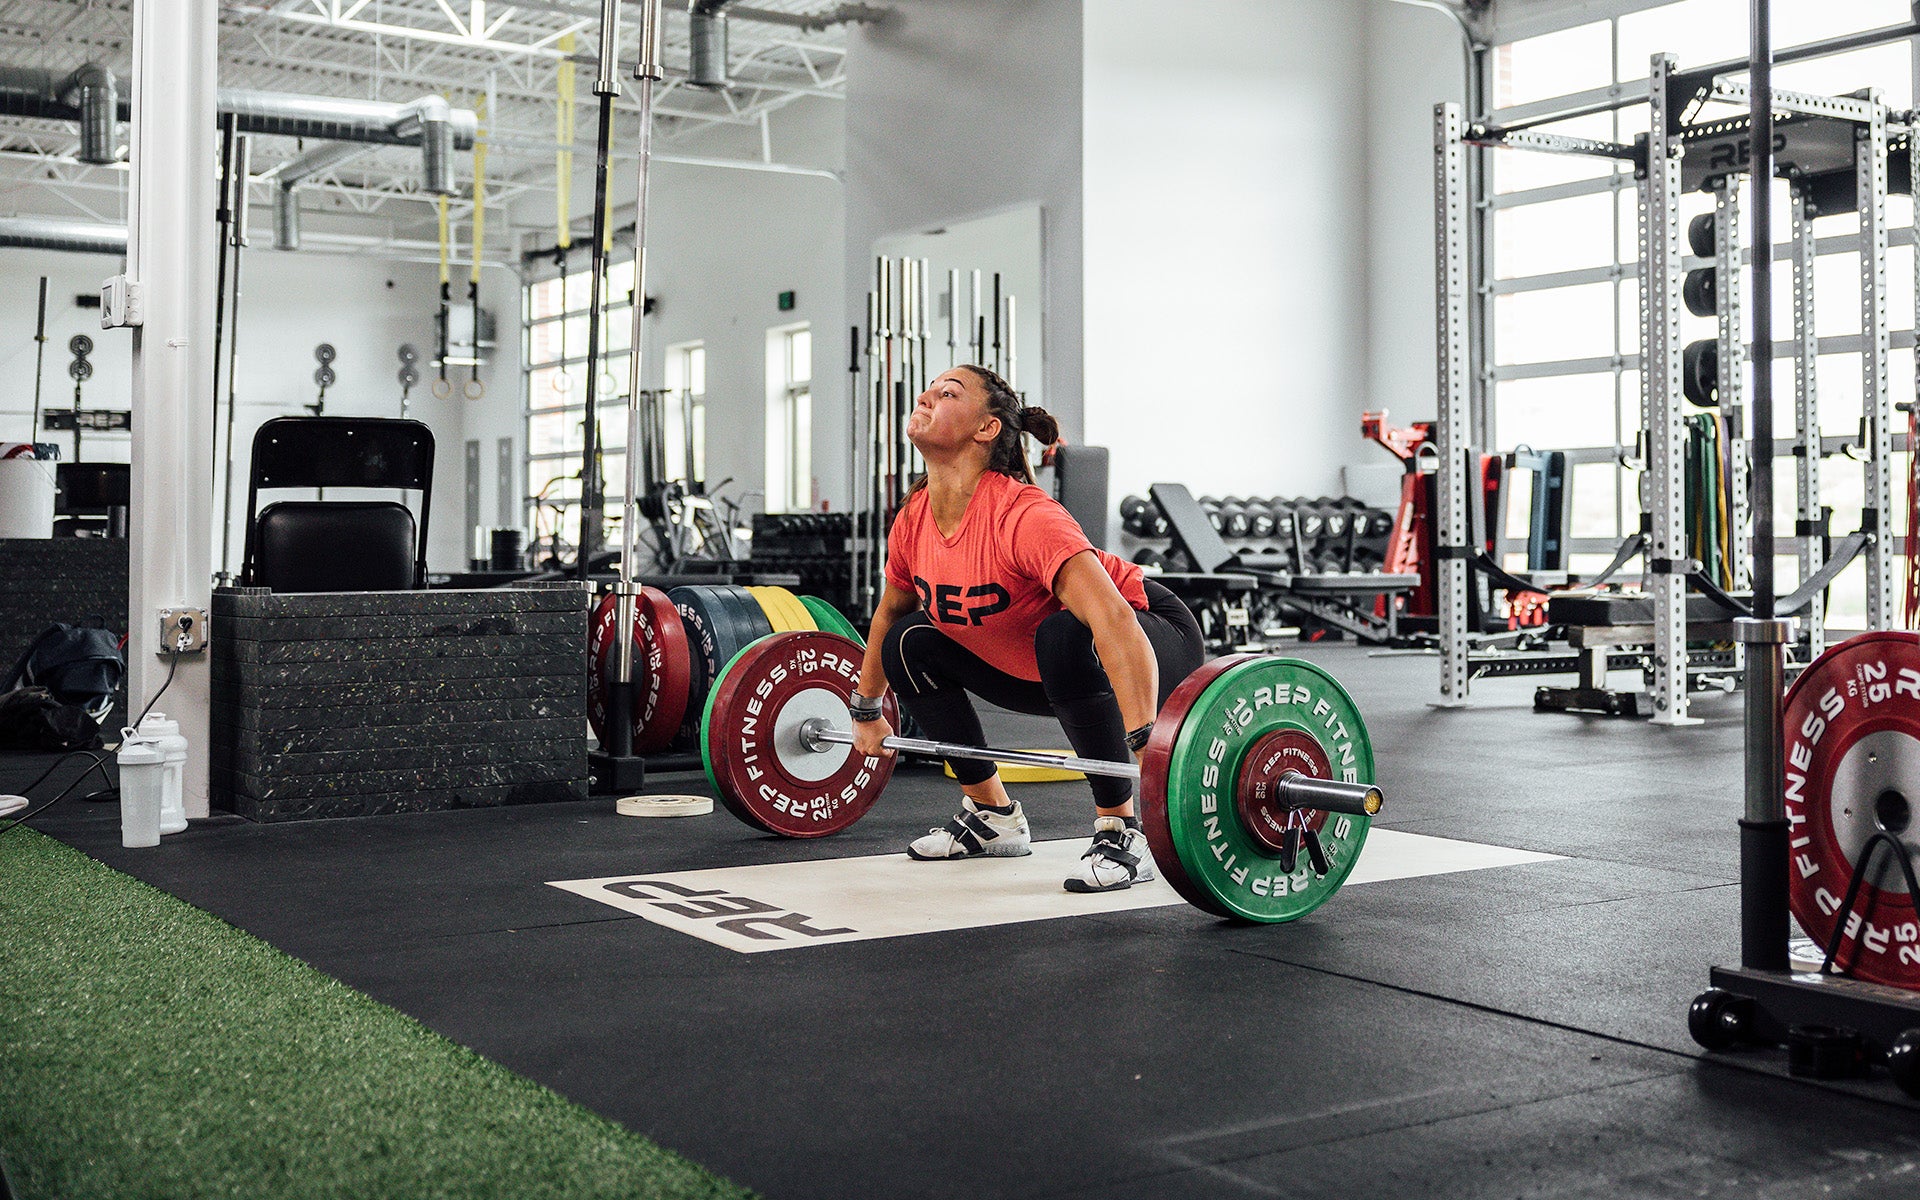 Female lifter set up for a lift on an Olympic lifting platform using REP's 15kg Alpine Weightlifting Bar.